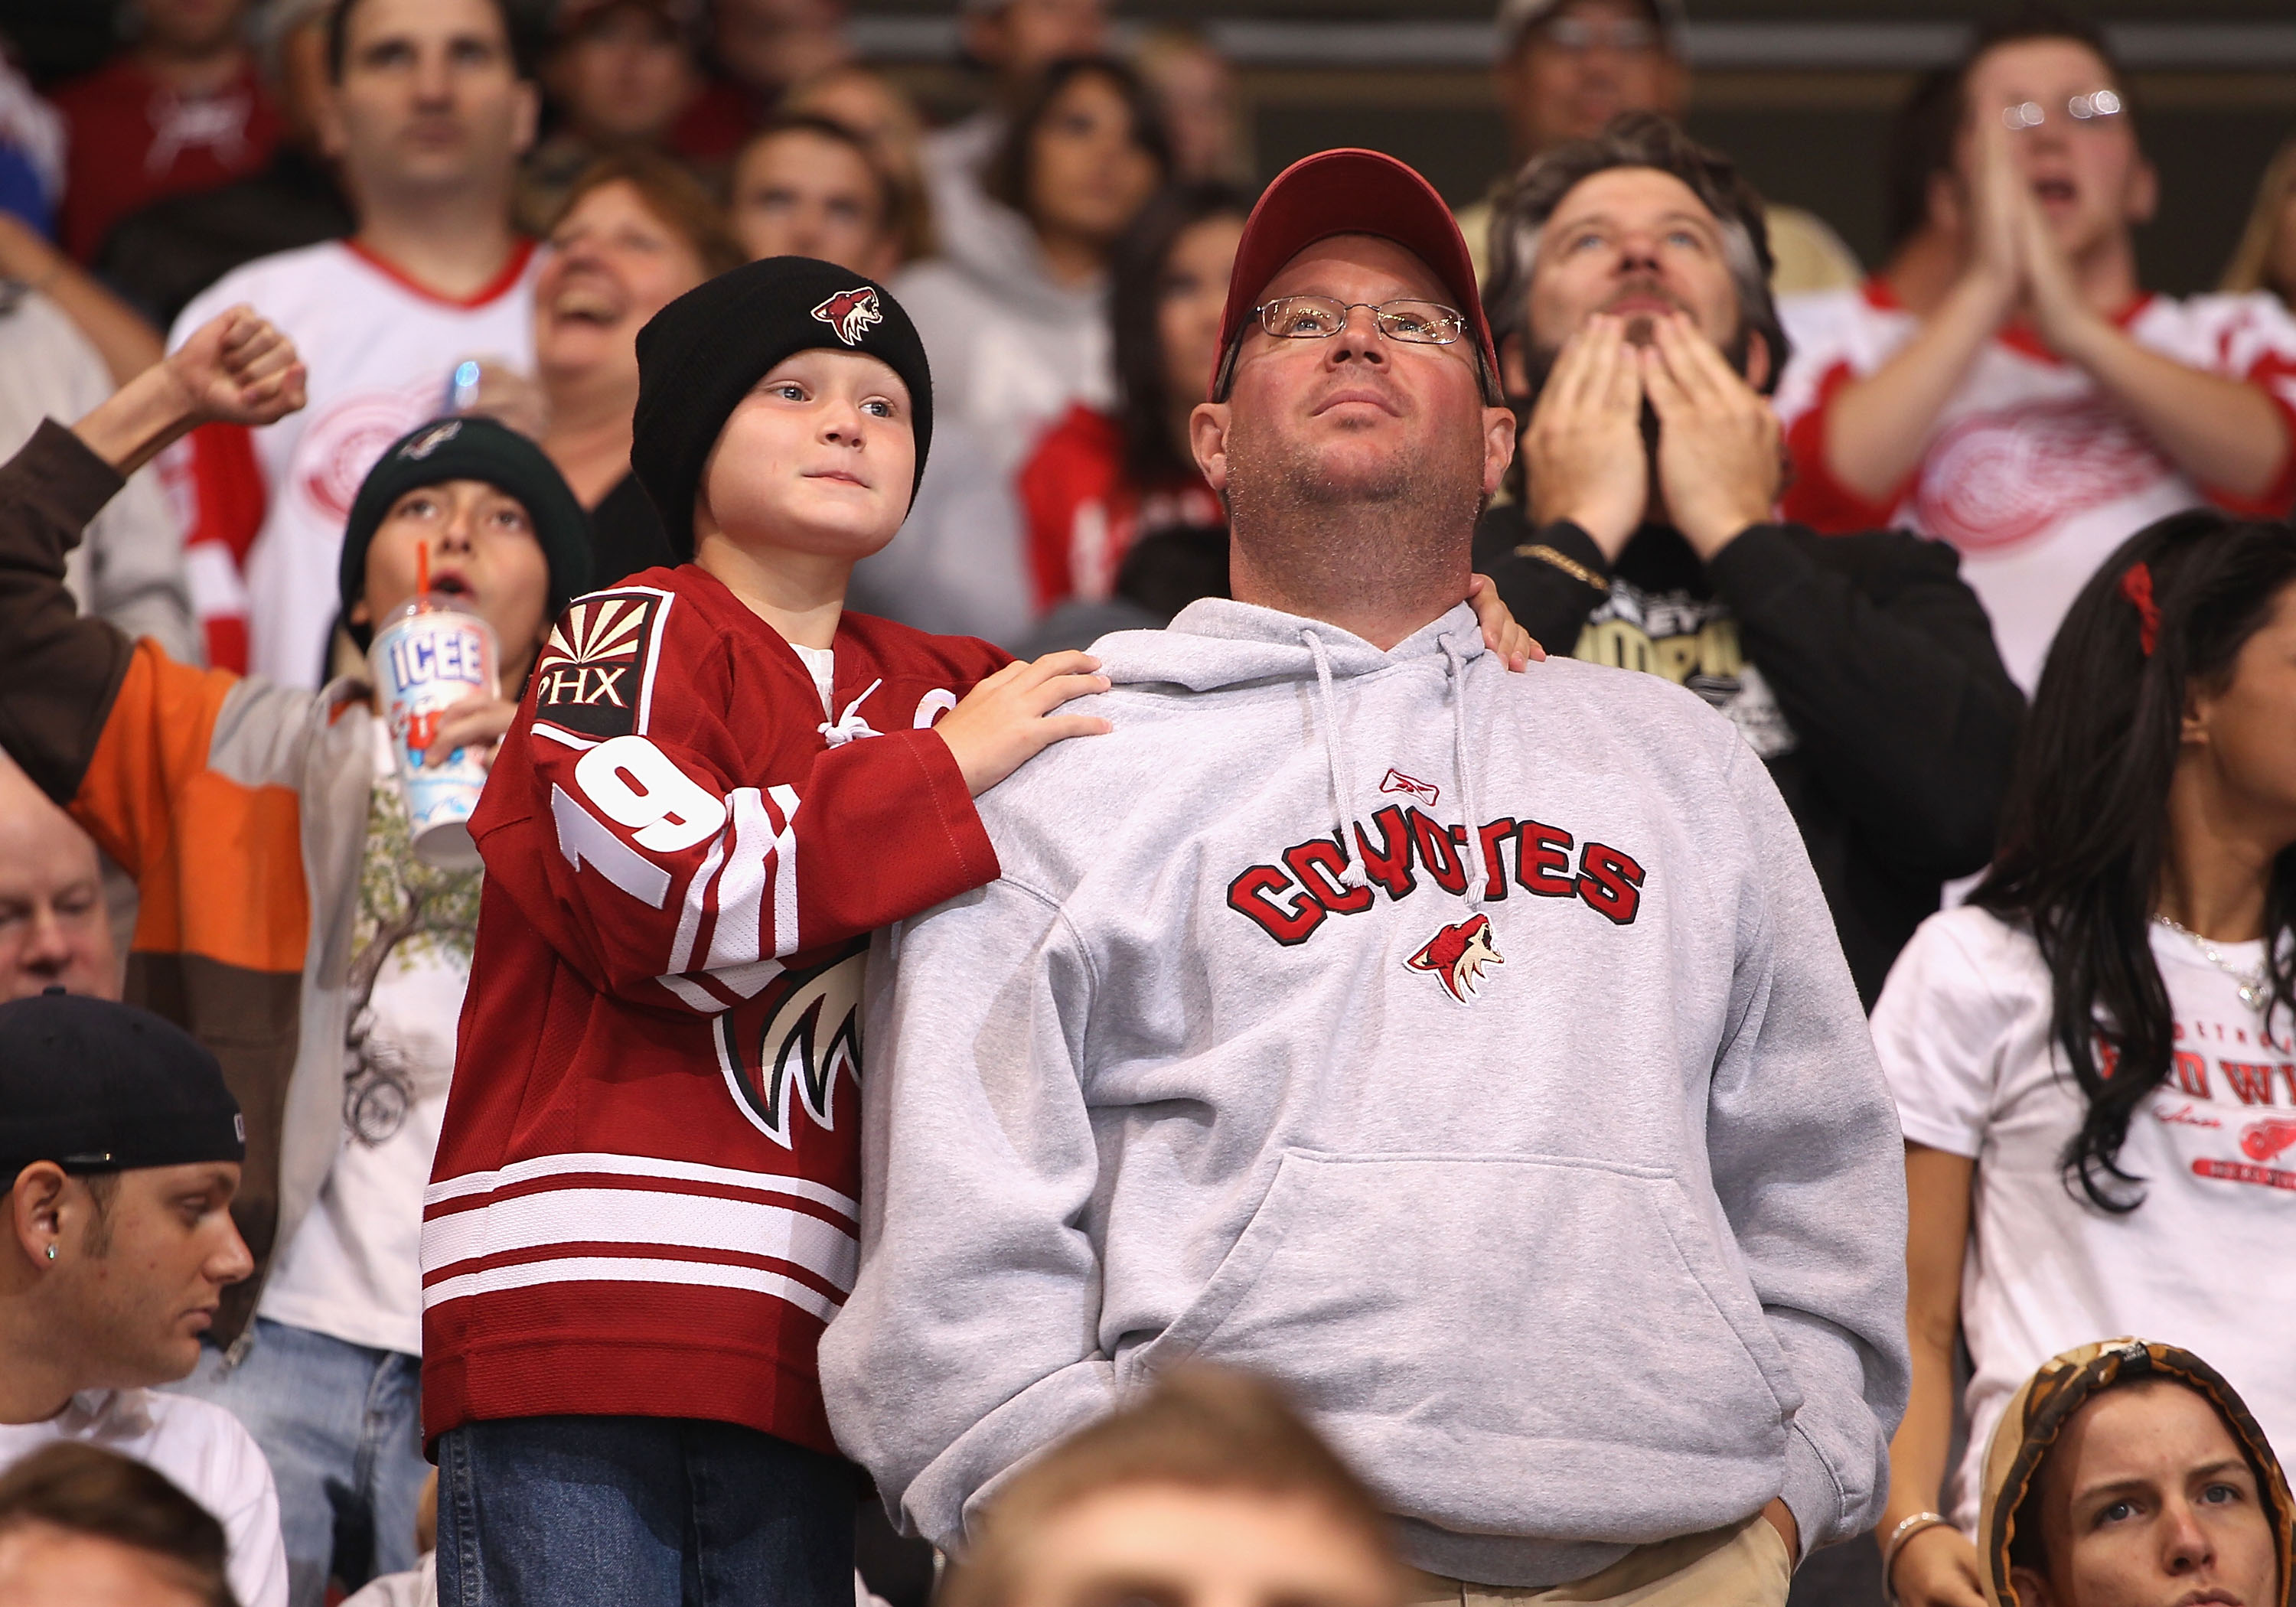 The Top 10 Craziest Fans in the NHL